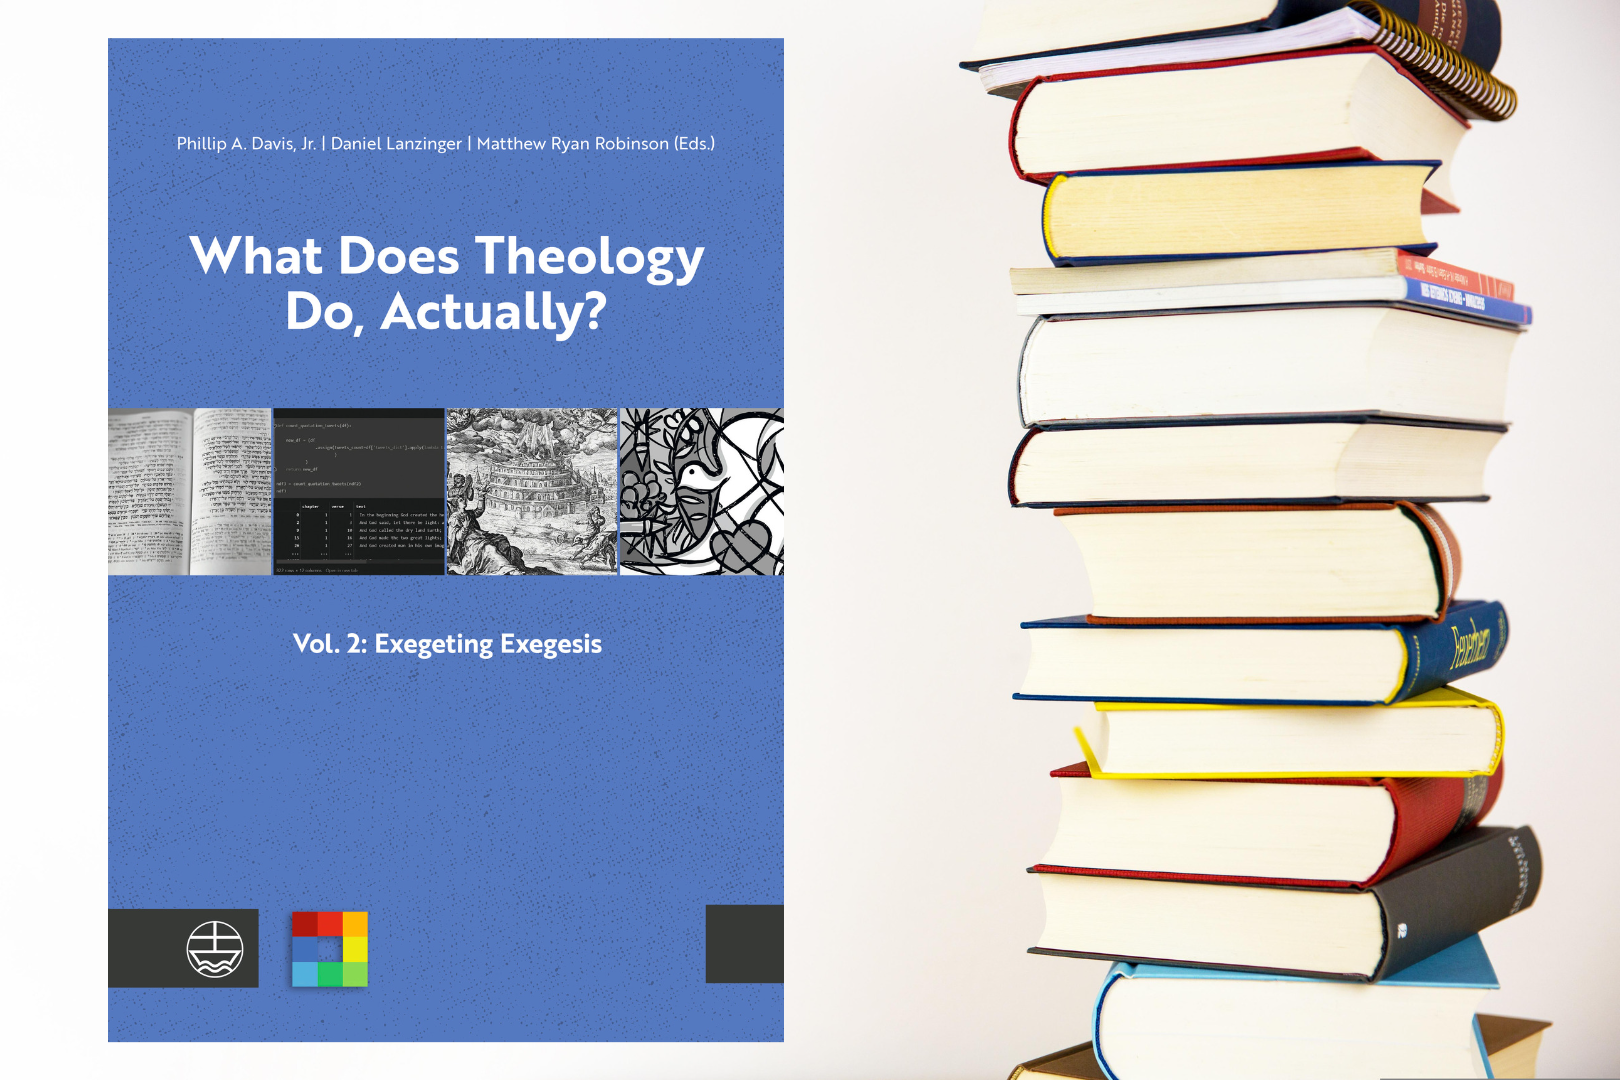 Davis Lanzinger Robinson (eds.). What Does Theology Do, Actually.png